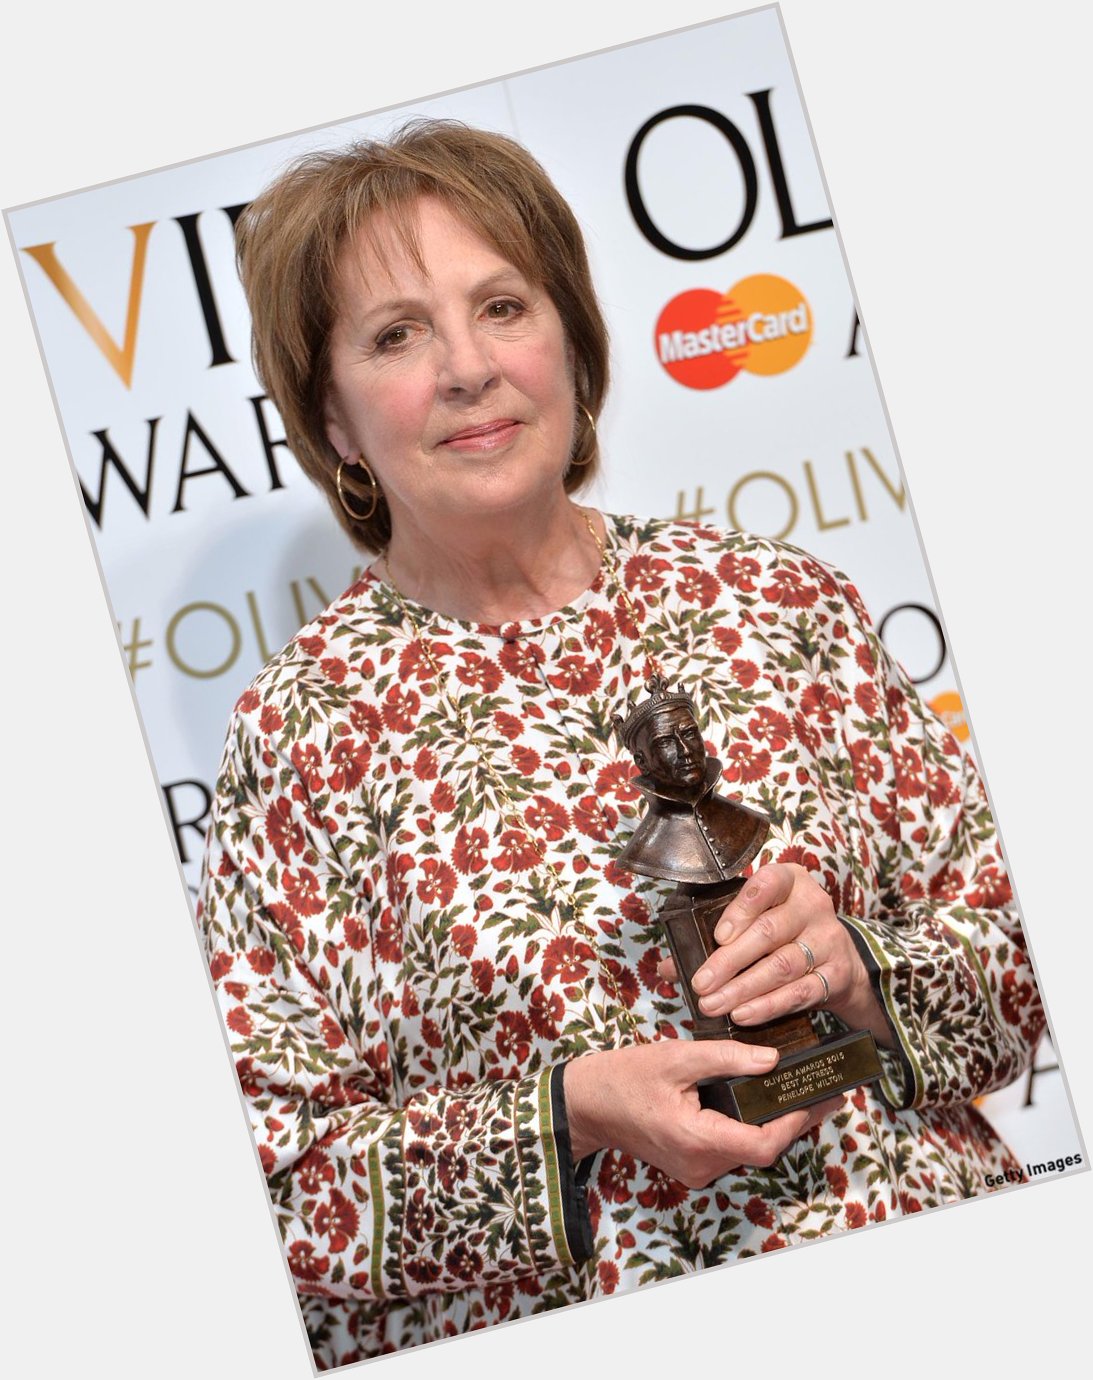 Happy birthday to Penelope Wilton -- hope you\re having a great day and even better year to come! 